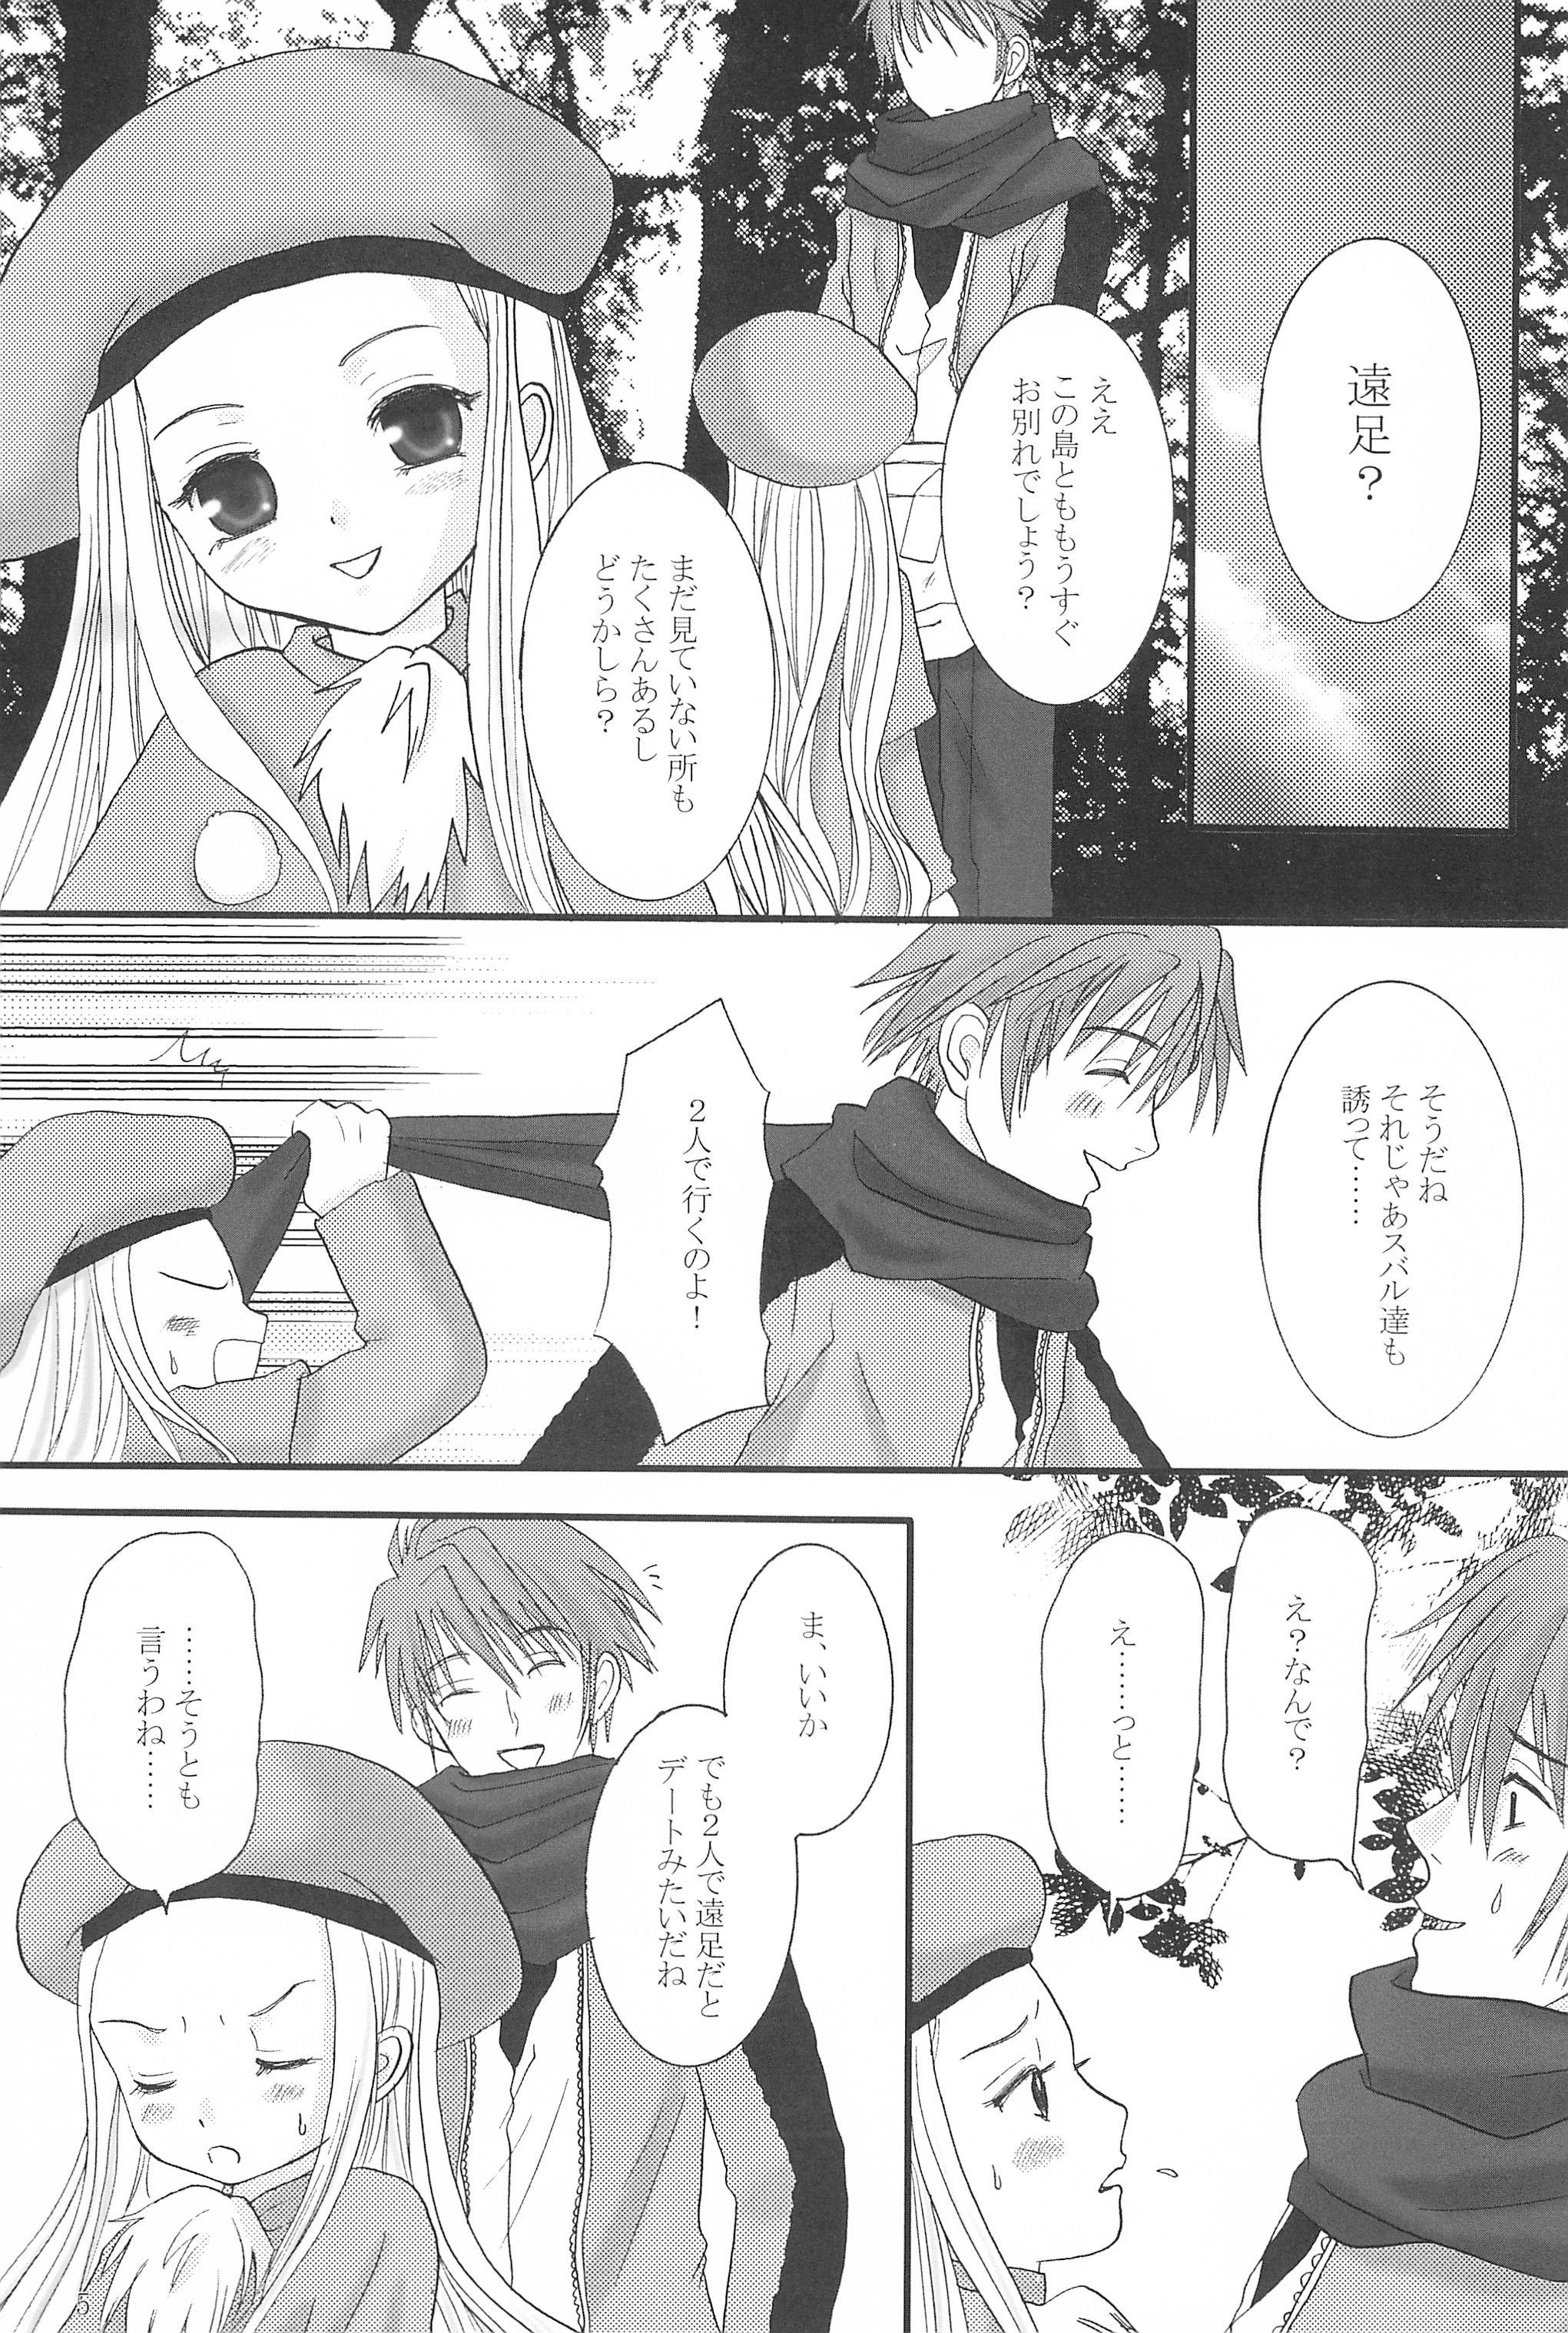 Gros Seins MY SWEET STRAWBERRY - Summon night Homosexual - Page 5